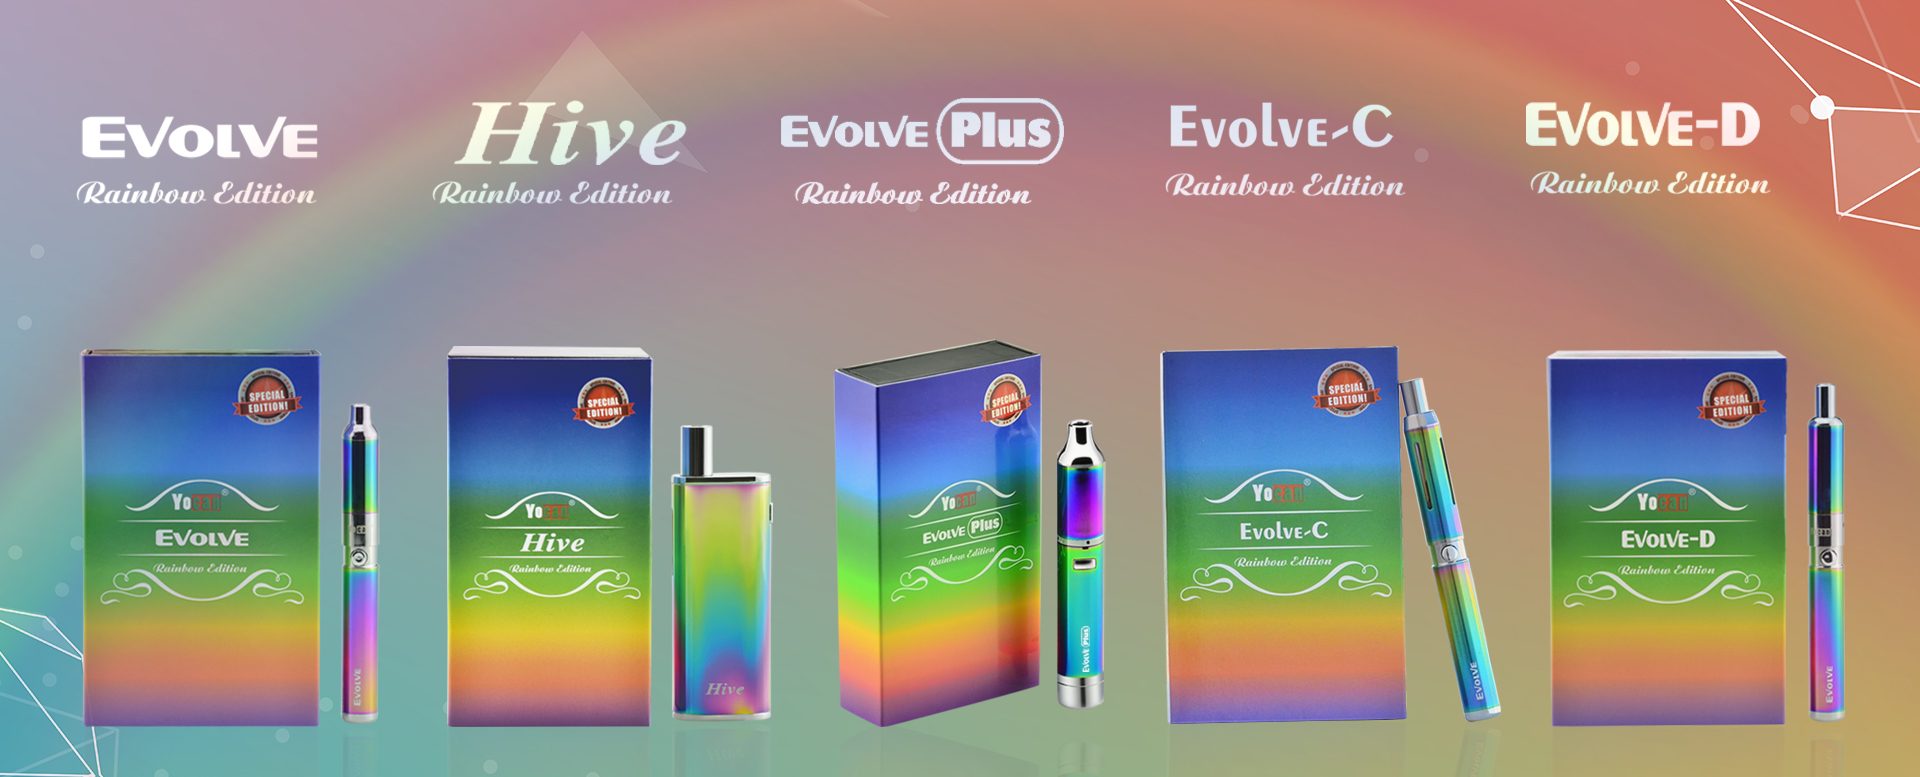 Yocan Rainbow Edition Vape pen comes with everything one needs to start having the ultimate vaping experience on the go.